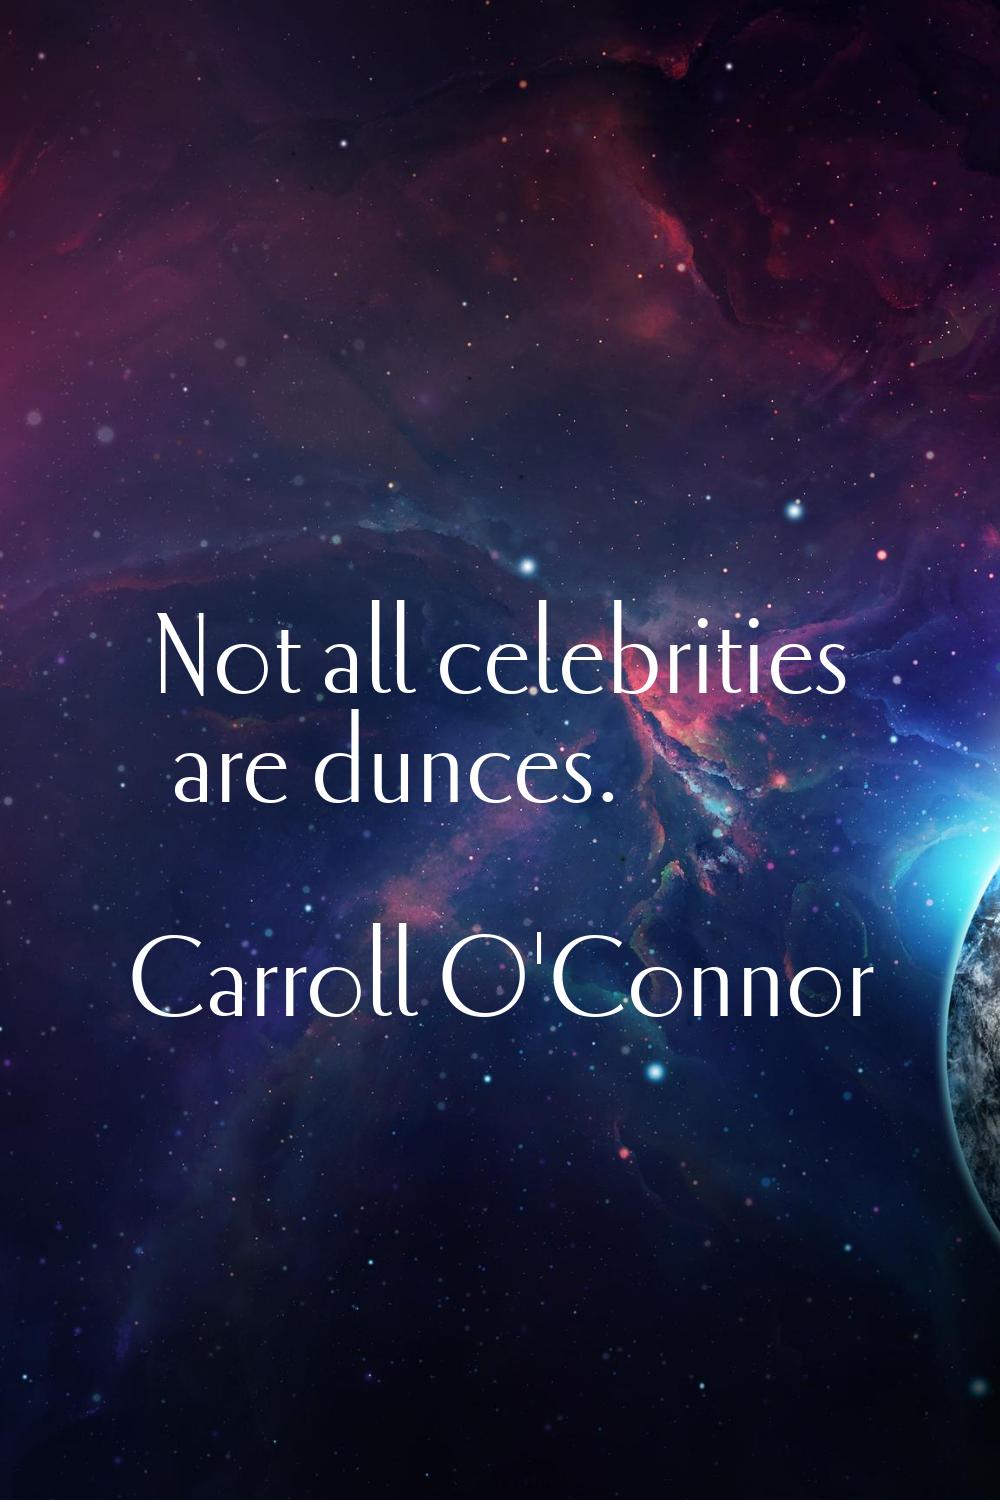 Not all celebrities are dunces.